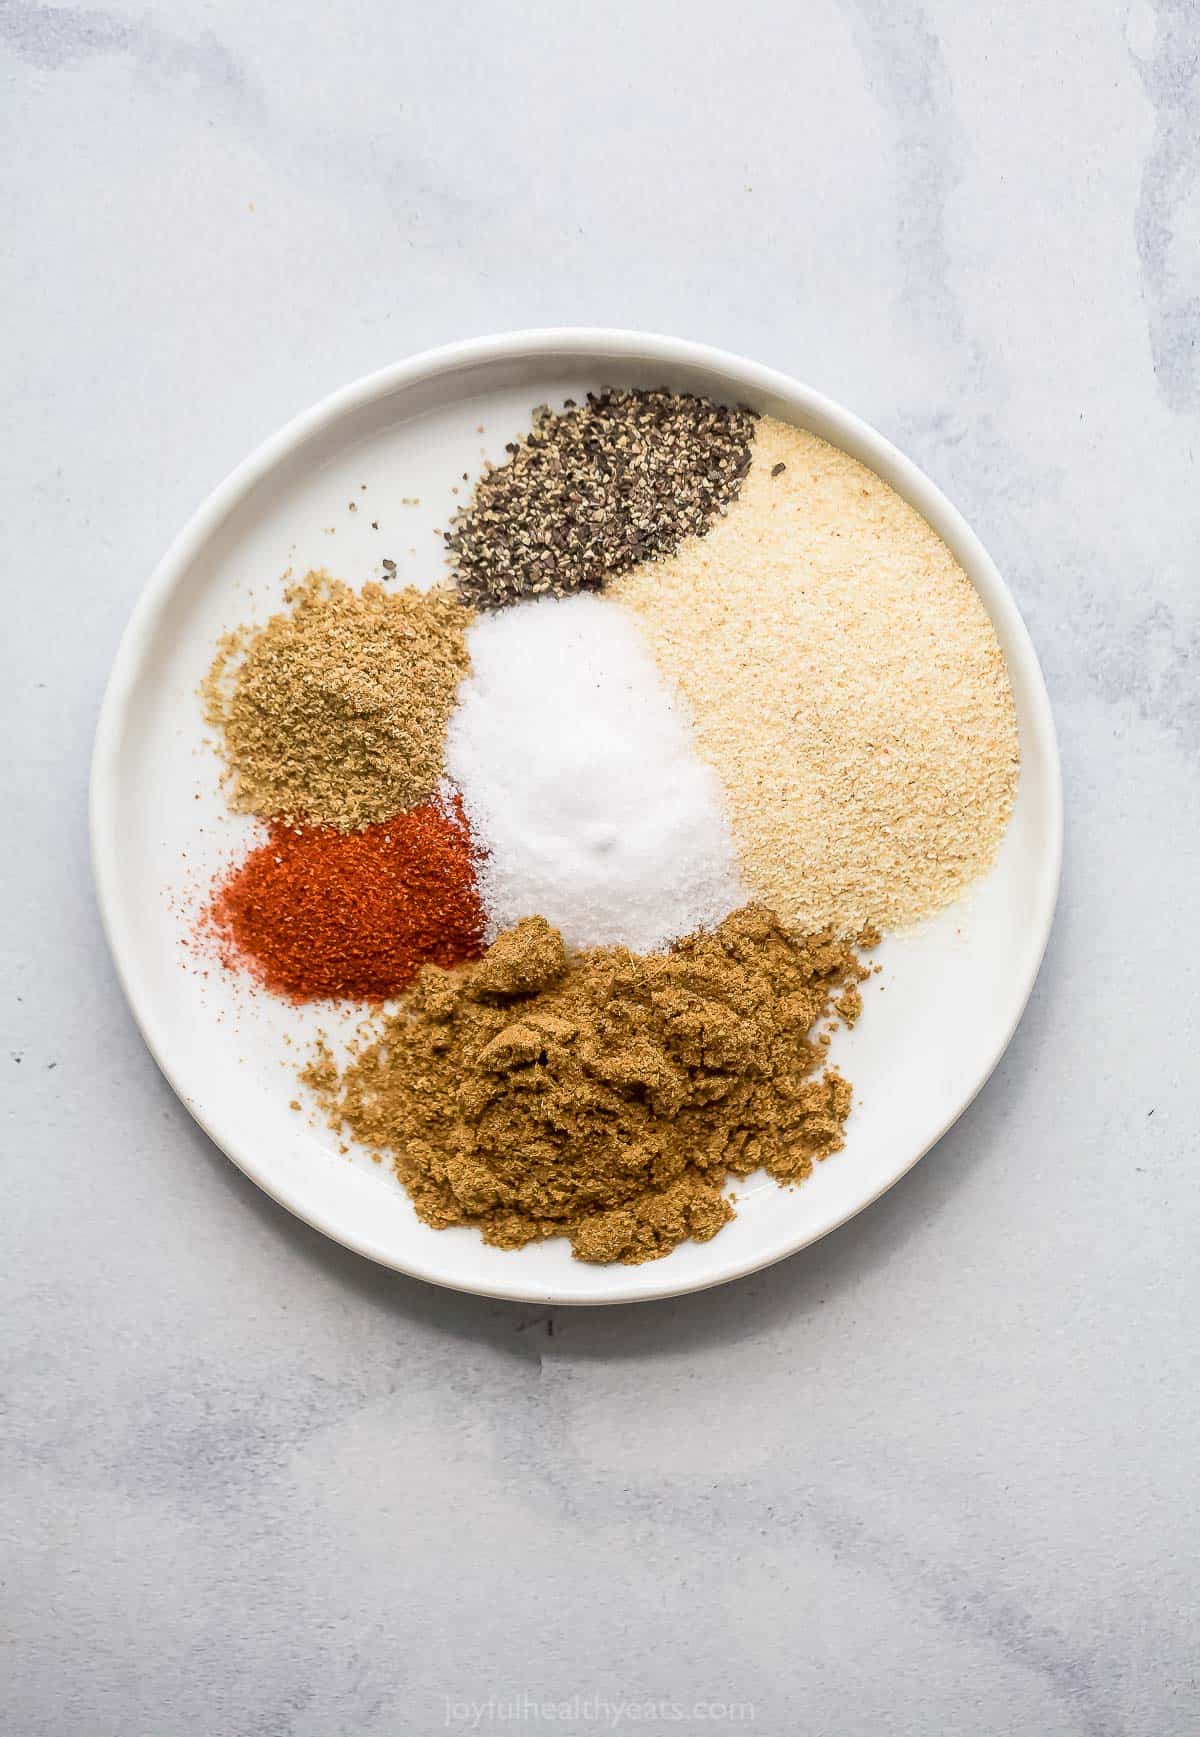 Spices on a plate.